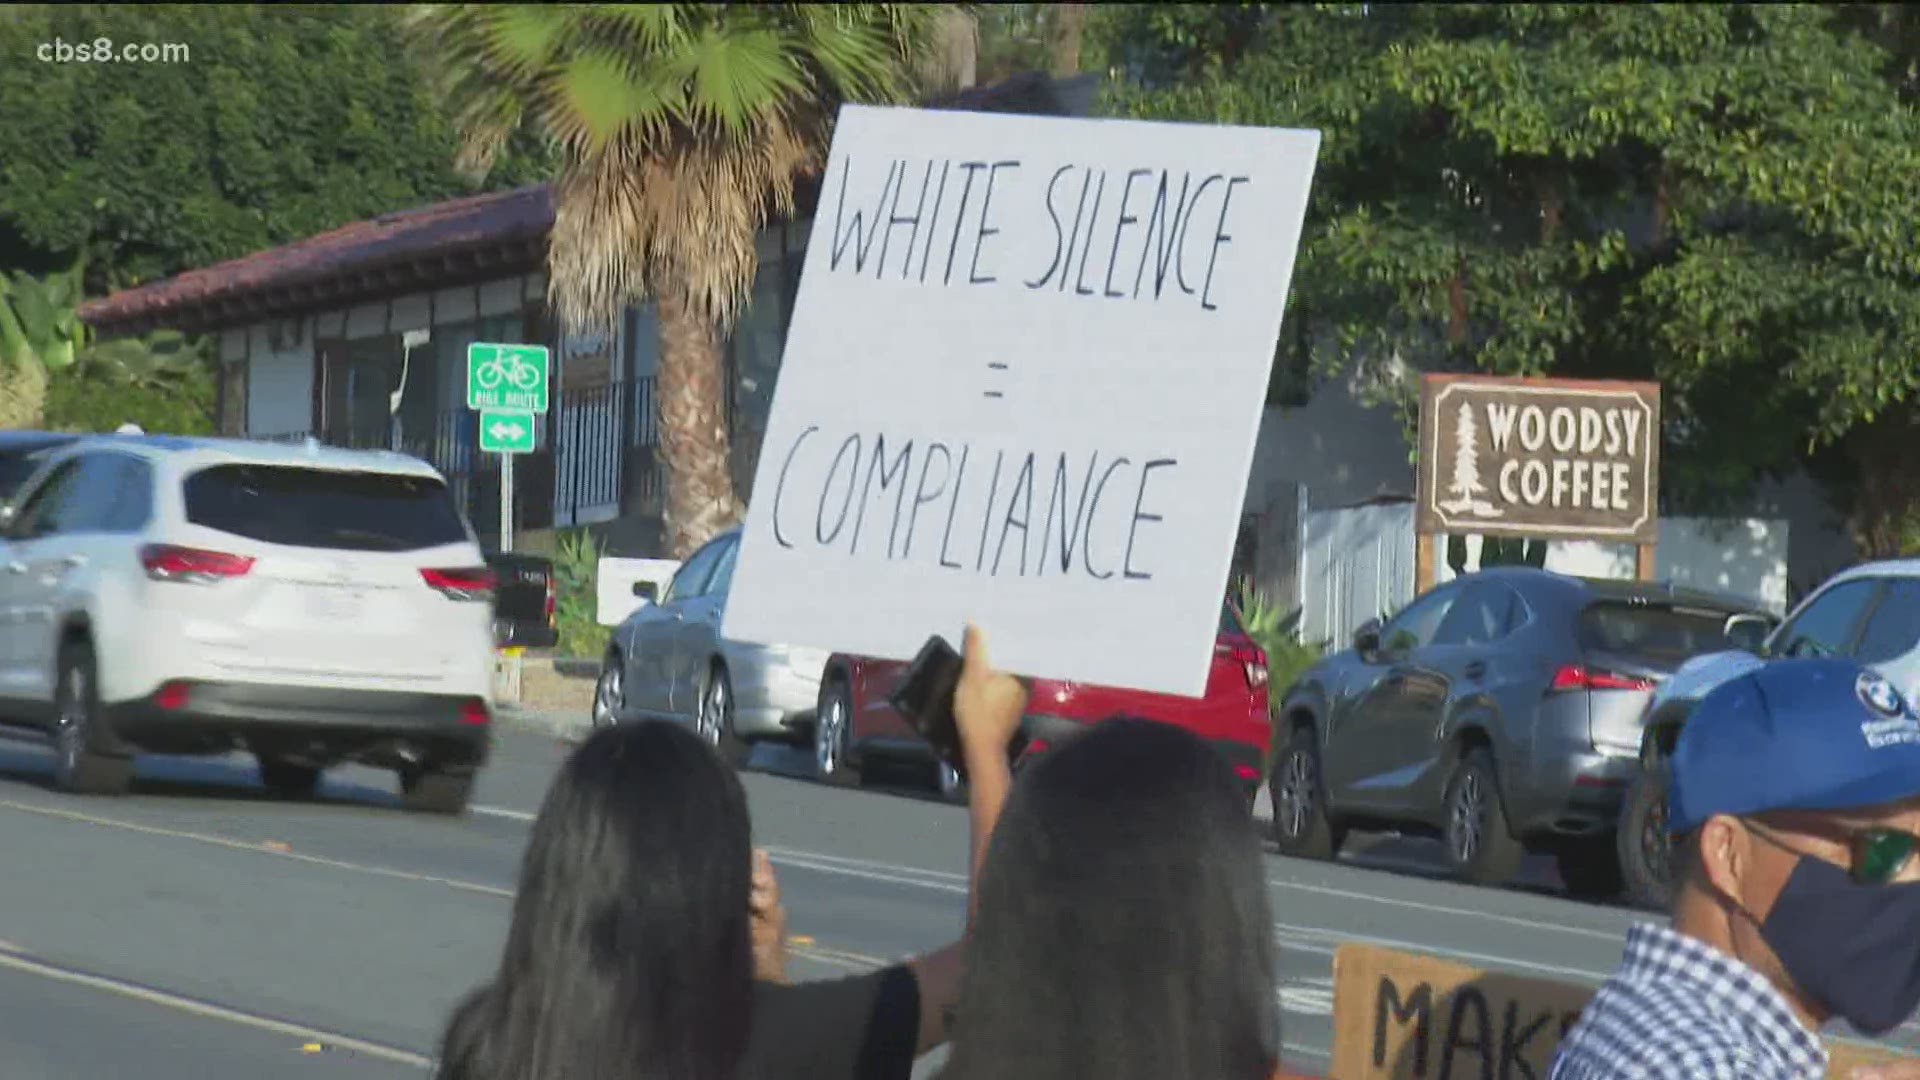 'Equality for Encinitas' organized the protest on Friday.